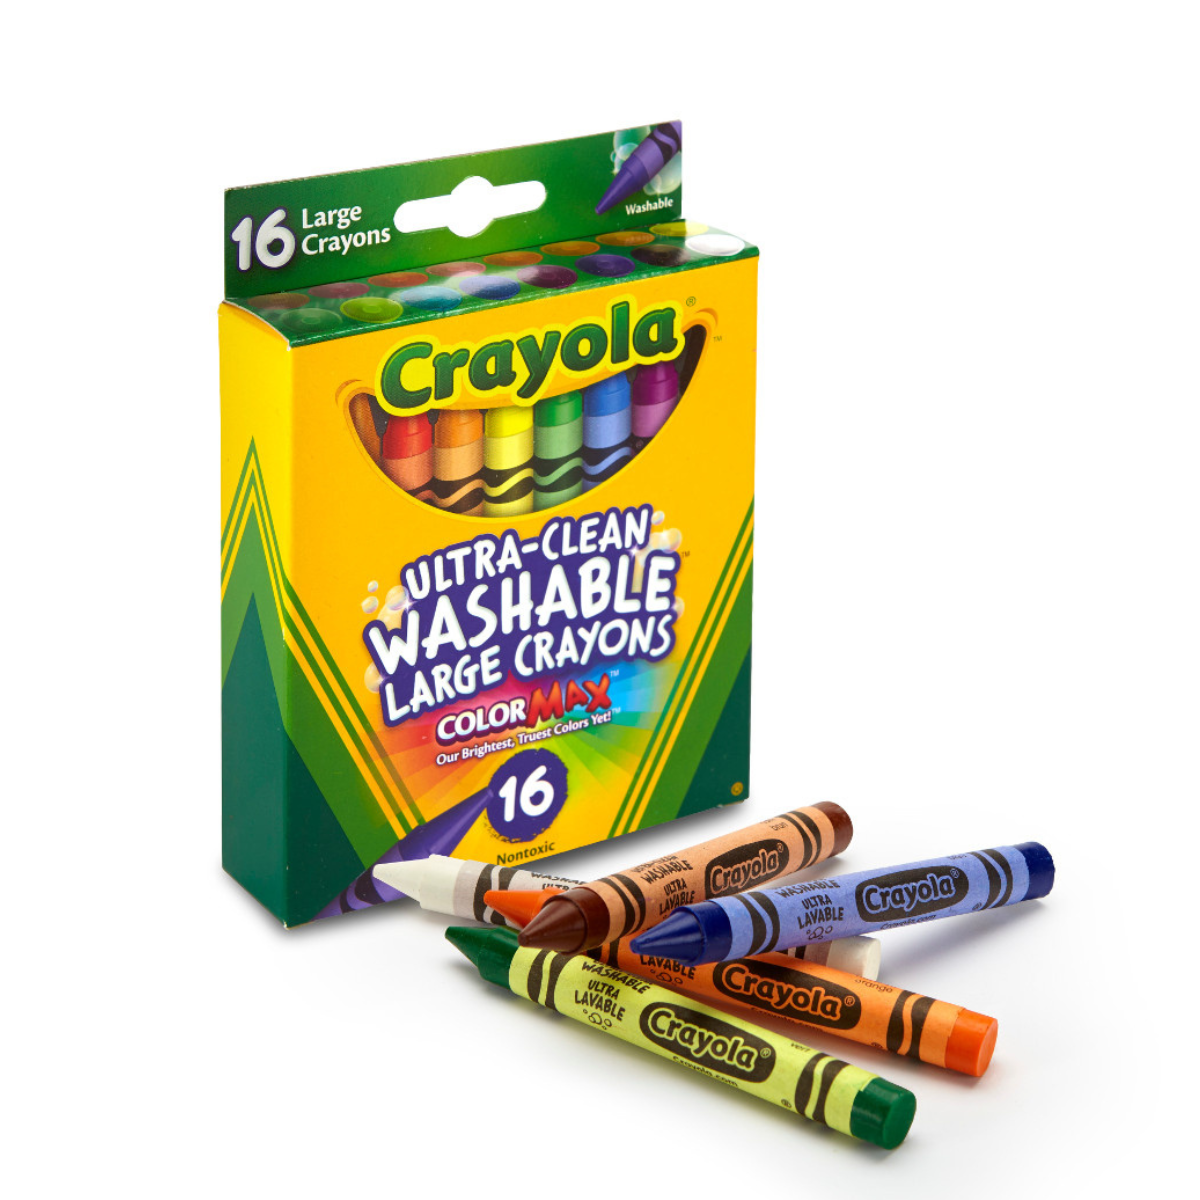 16 Ultra-Clean Washable Large Crayons